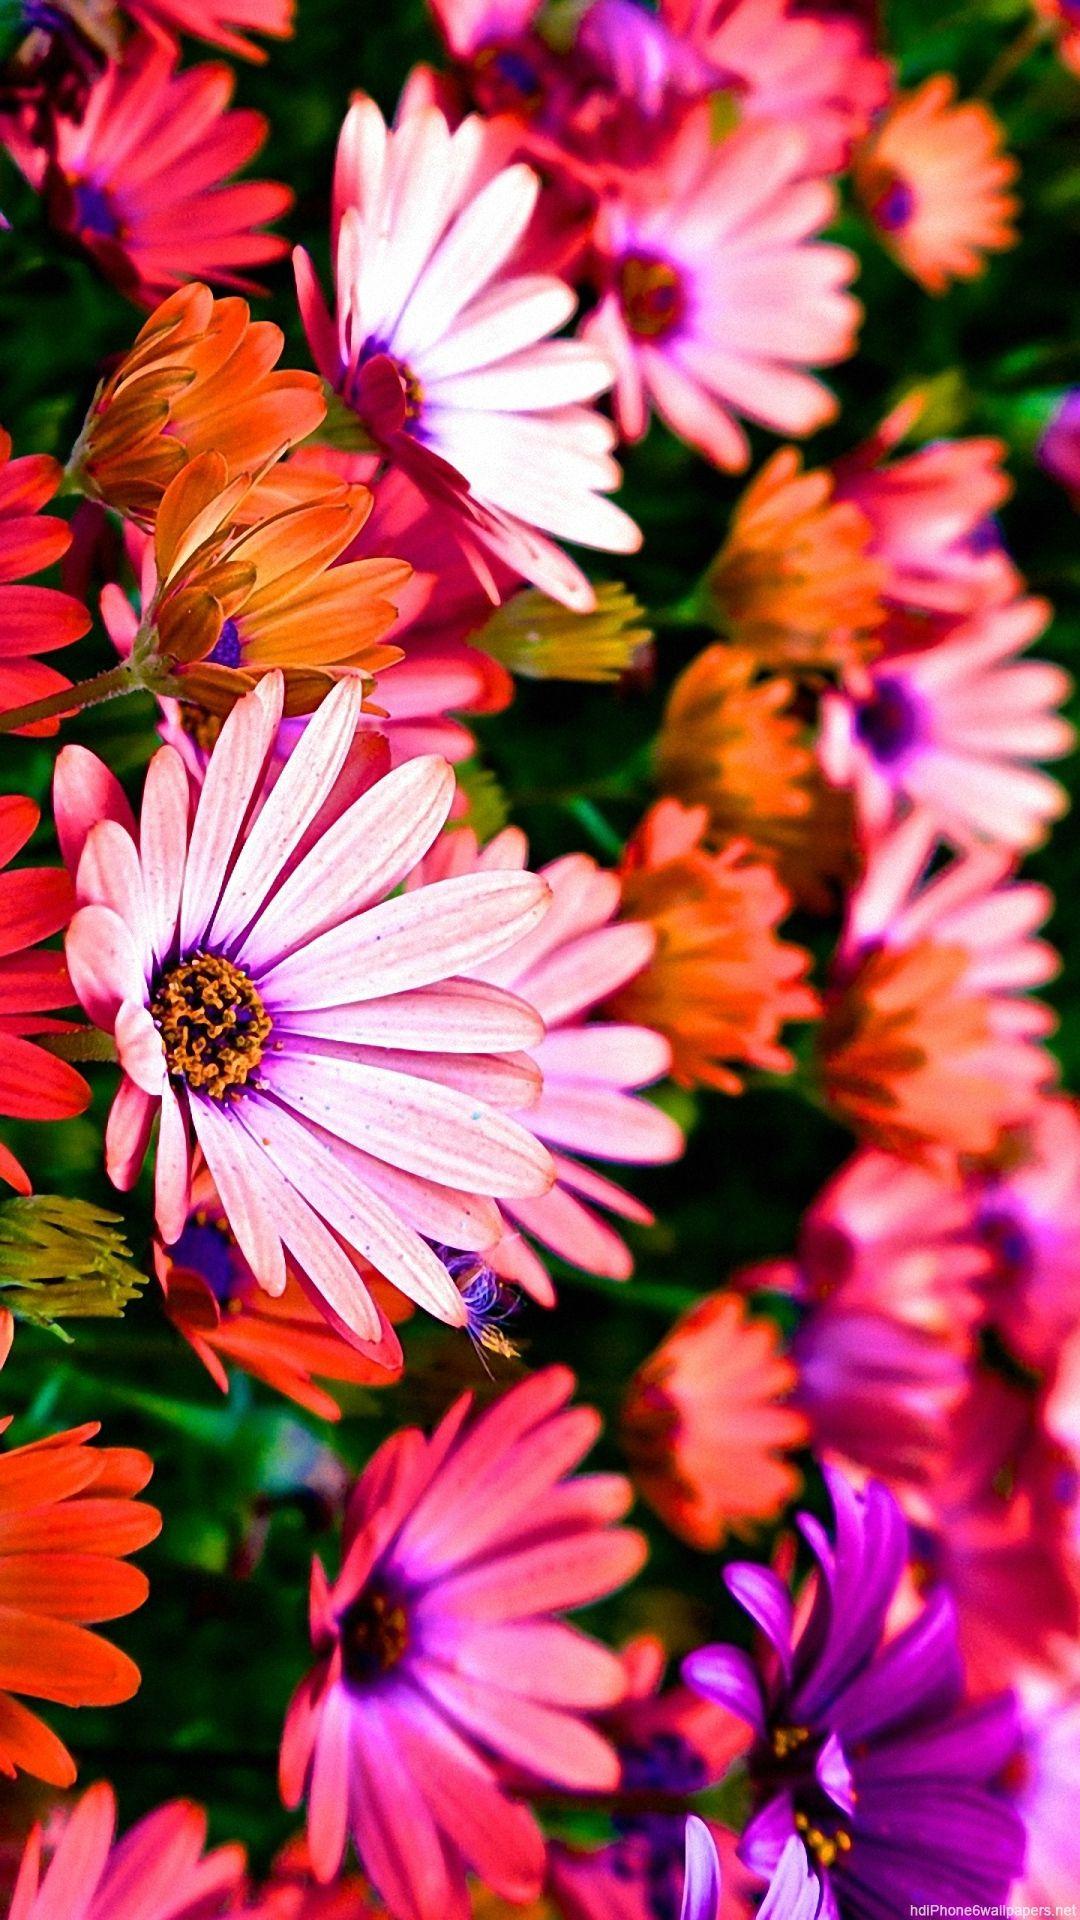 colorful sunshine flowers iPhone 6 wallpaper HD and 1080P 6 Plus